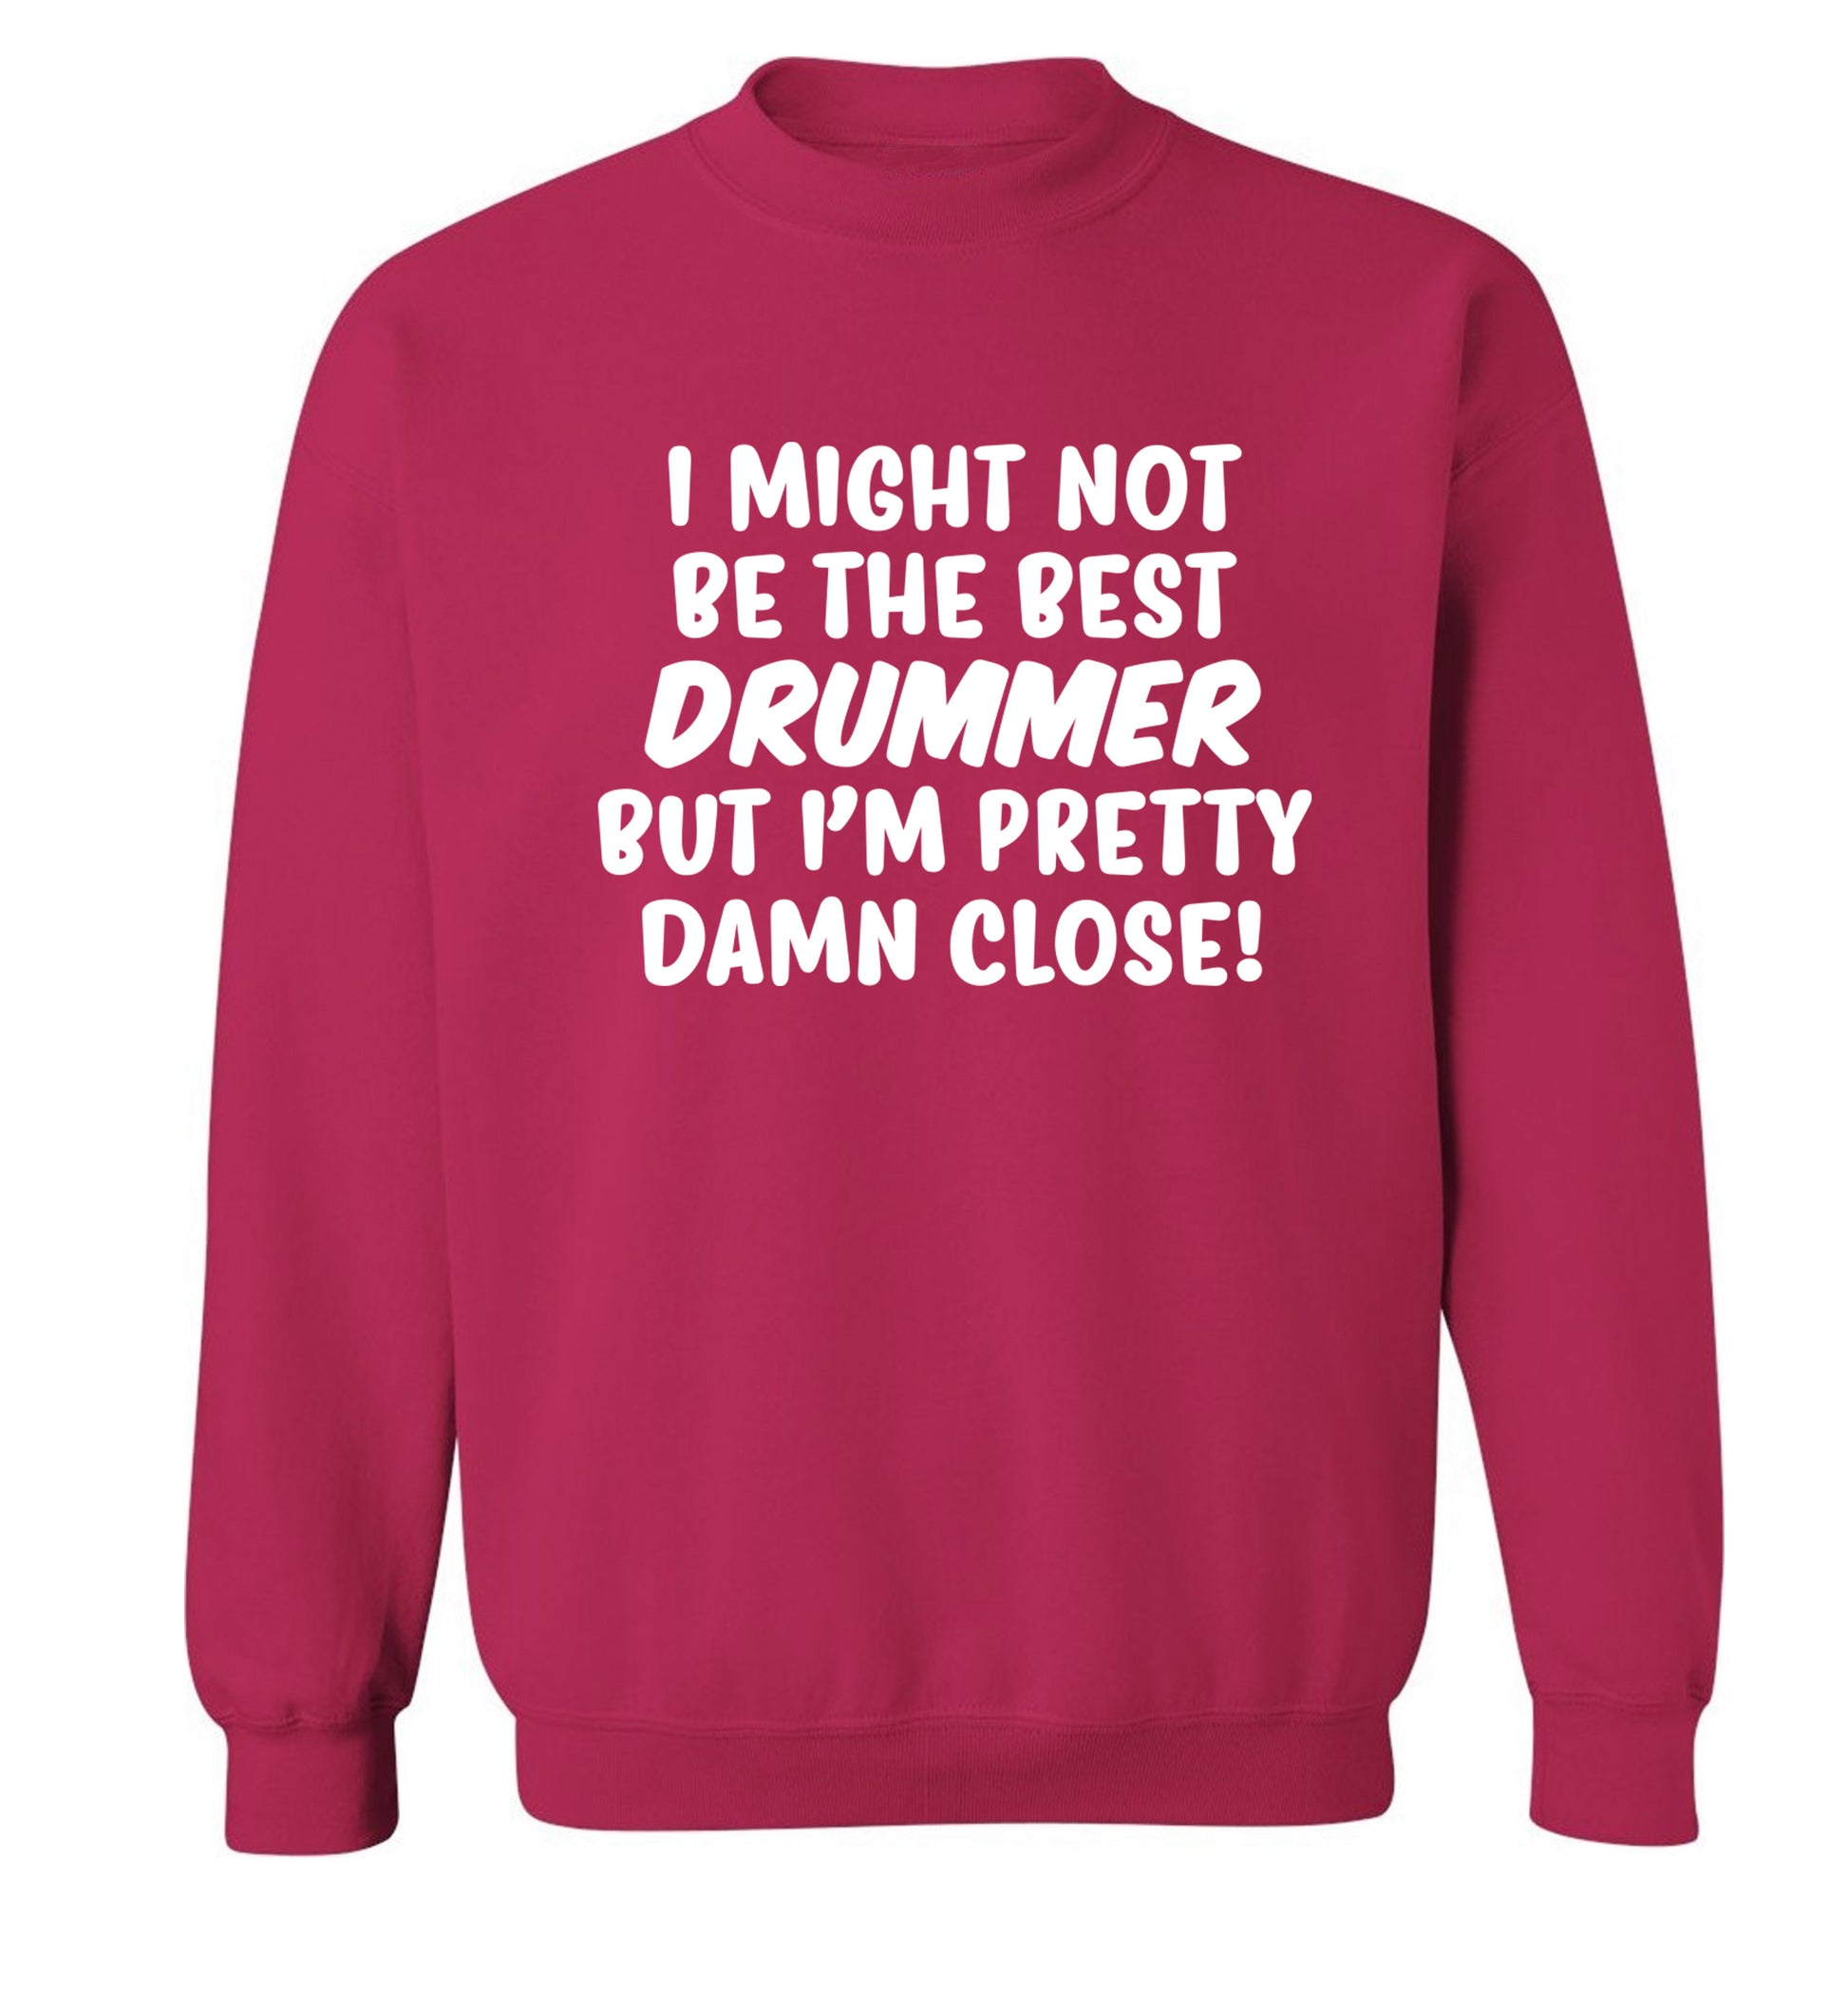 I might not be the best drummer but I'm pretty close! Adult's unisexpink Sweater 2XL